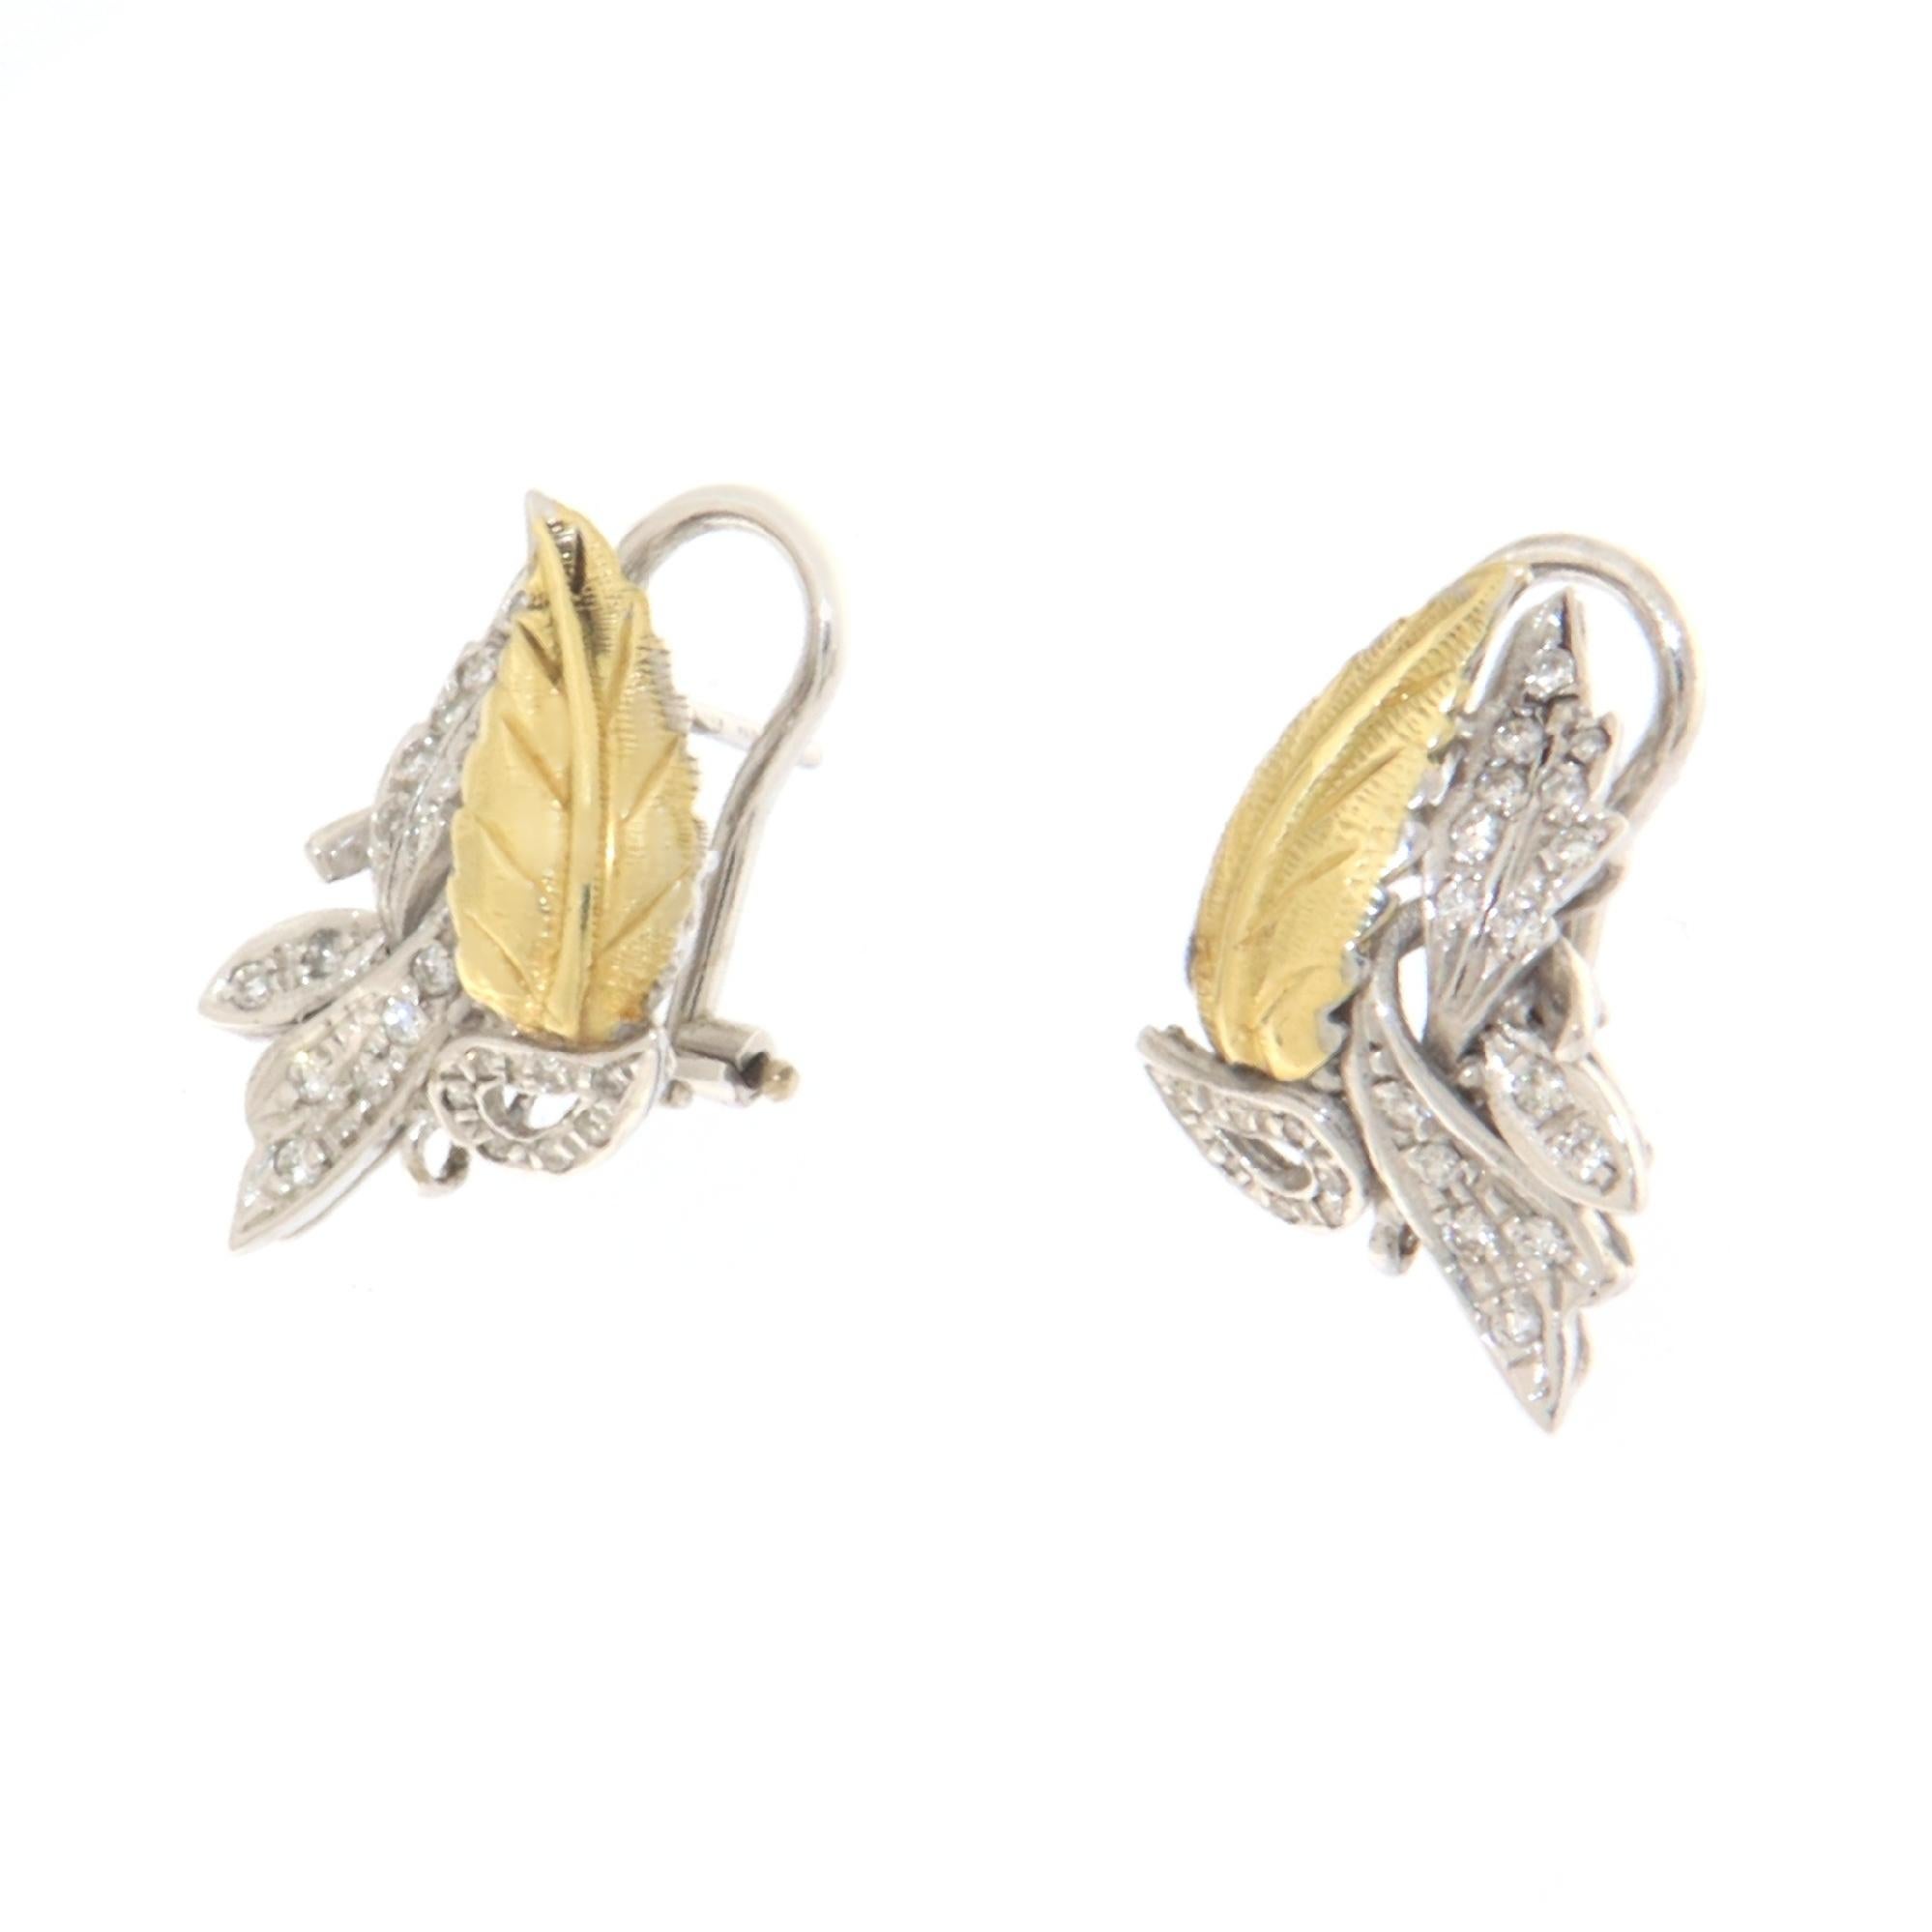 Brilliant Cut Leaves Diamonds 18 Karat Yellow And White Gold Stud Earrings For Sale